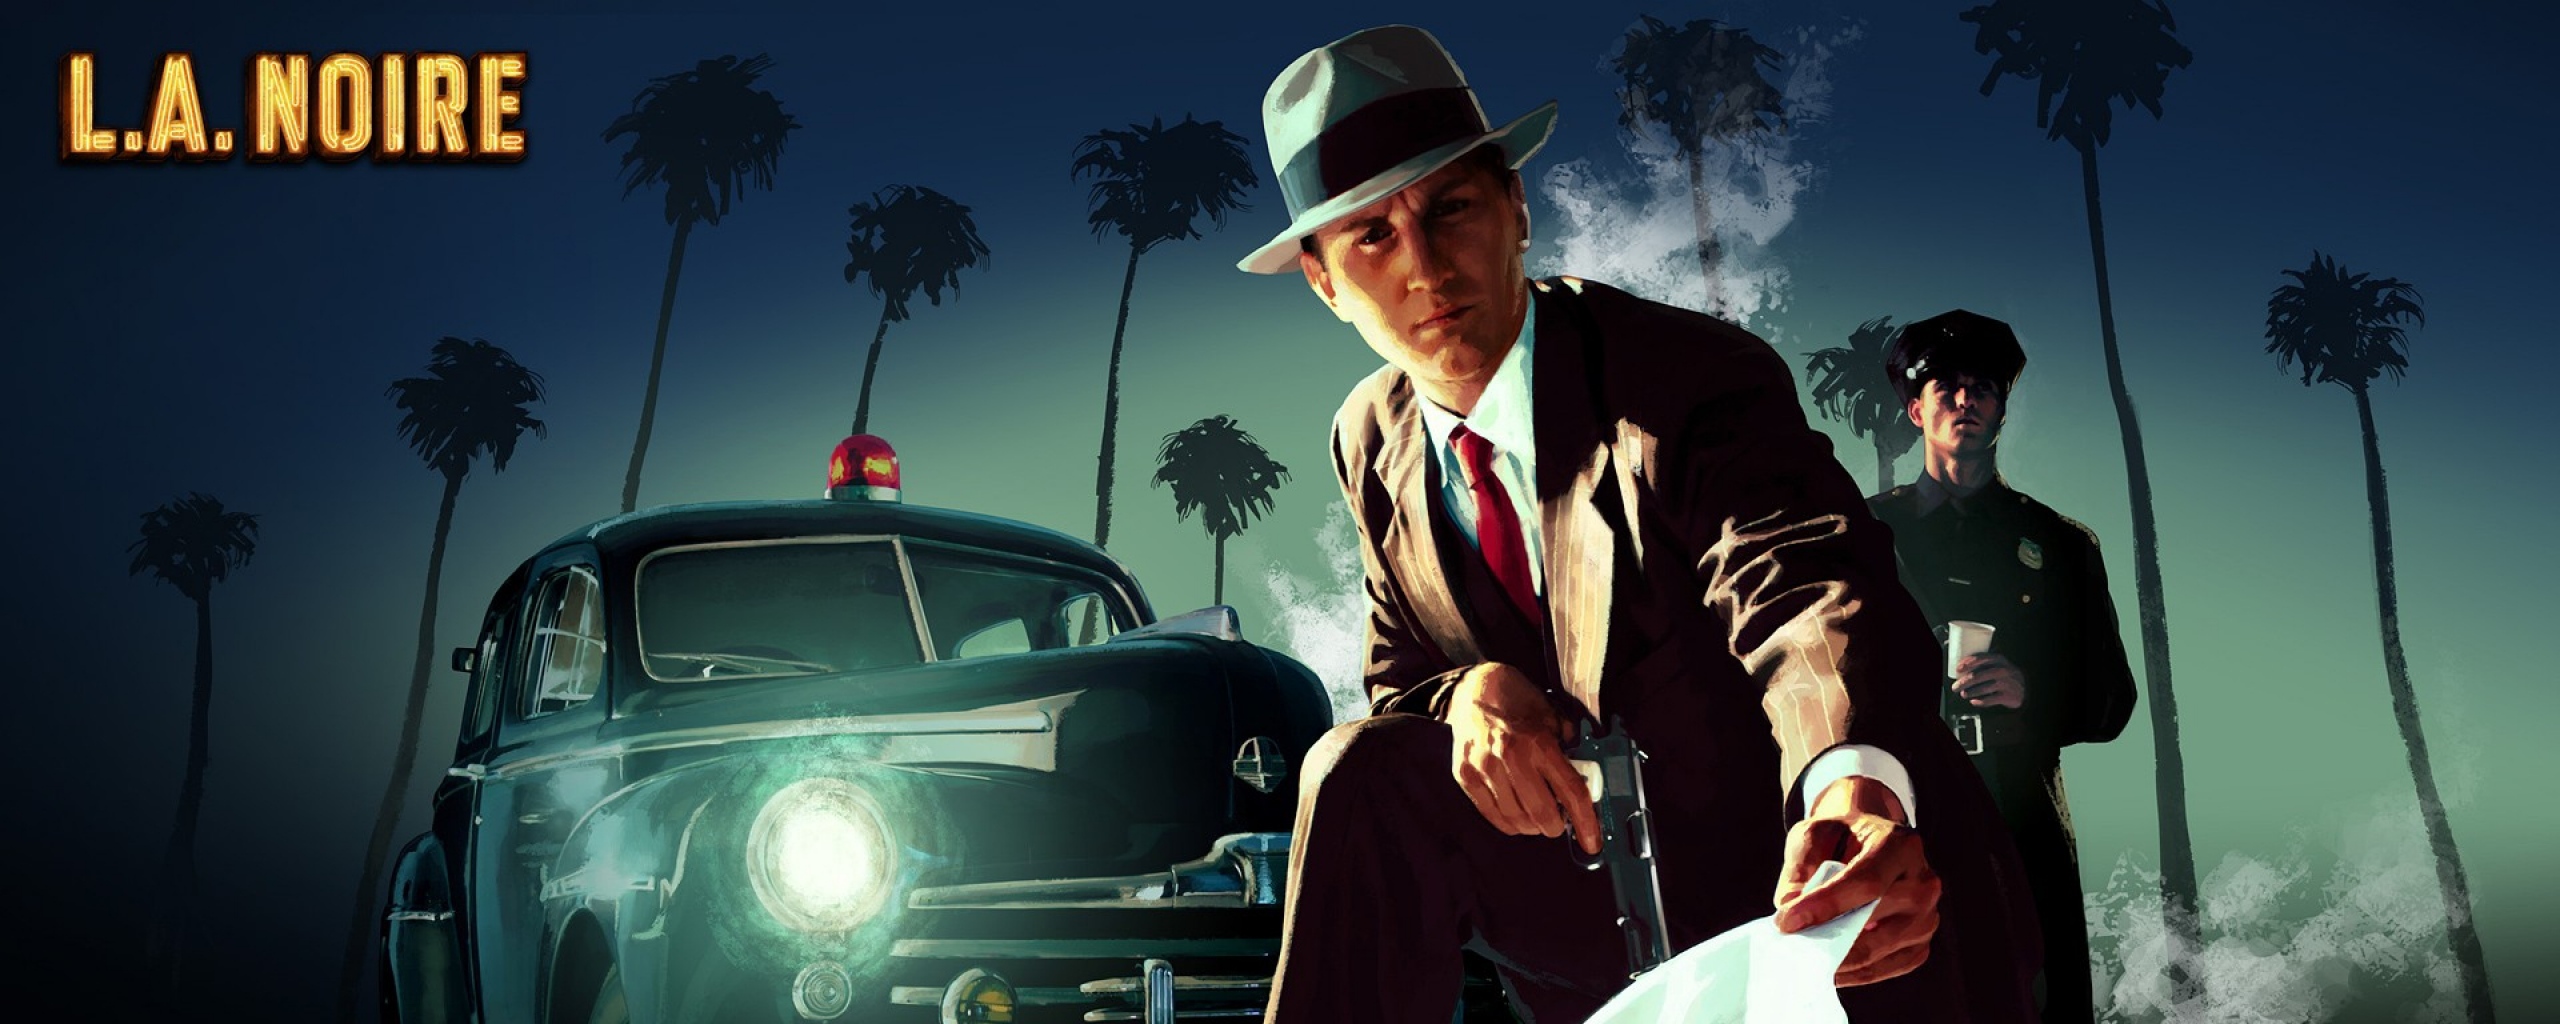 L A Noire Wallpaper Background And Image